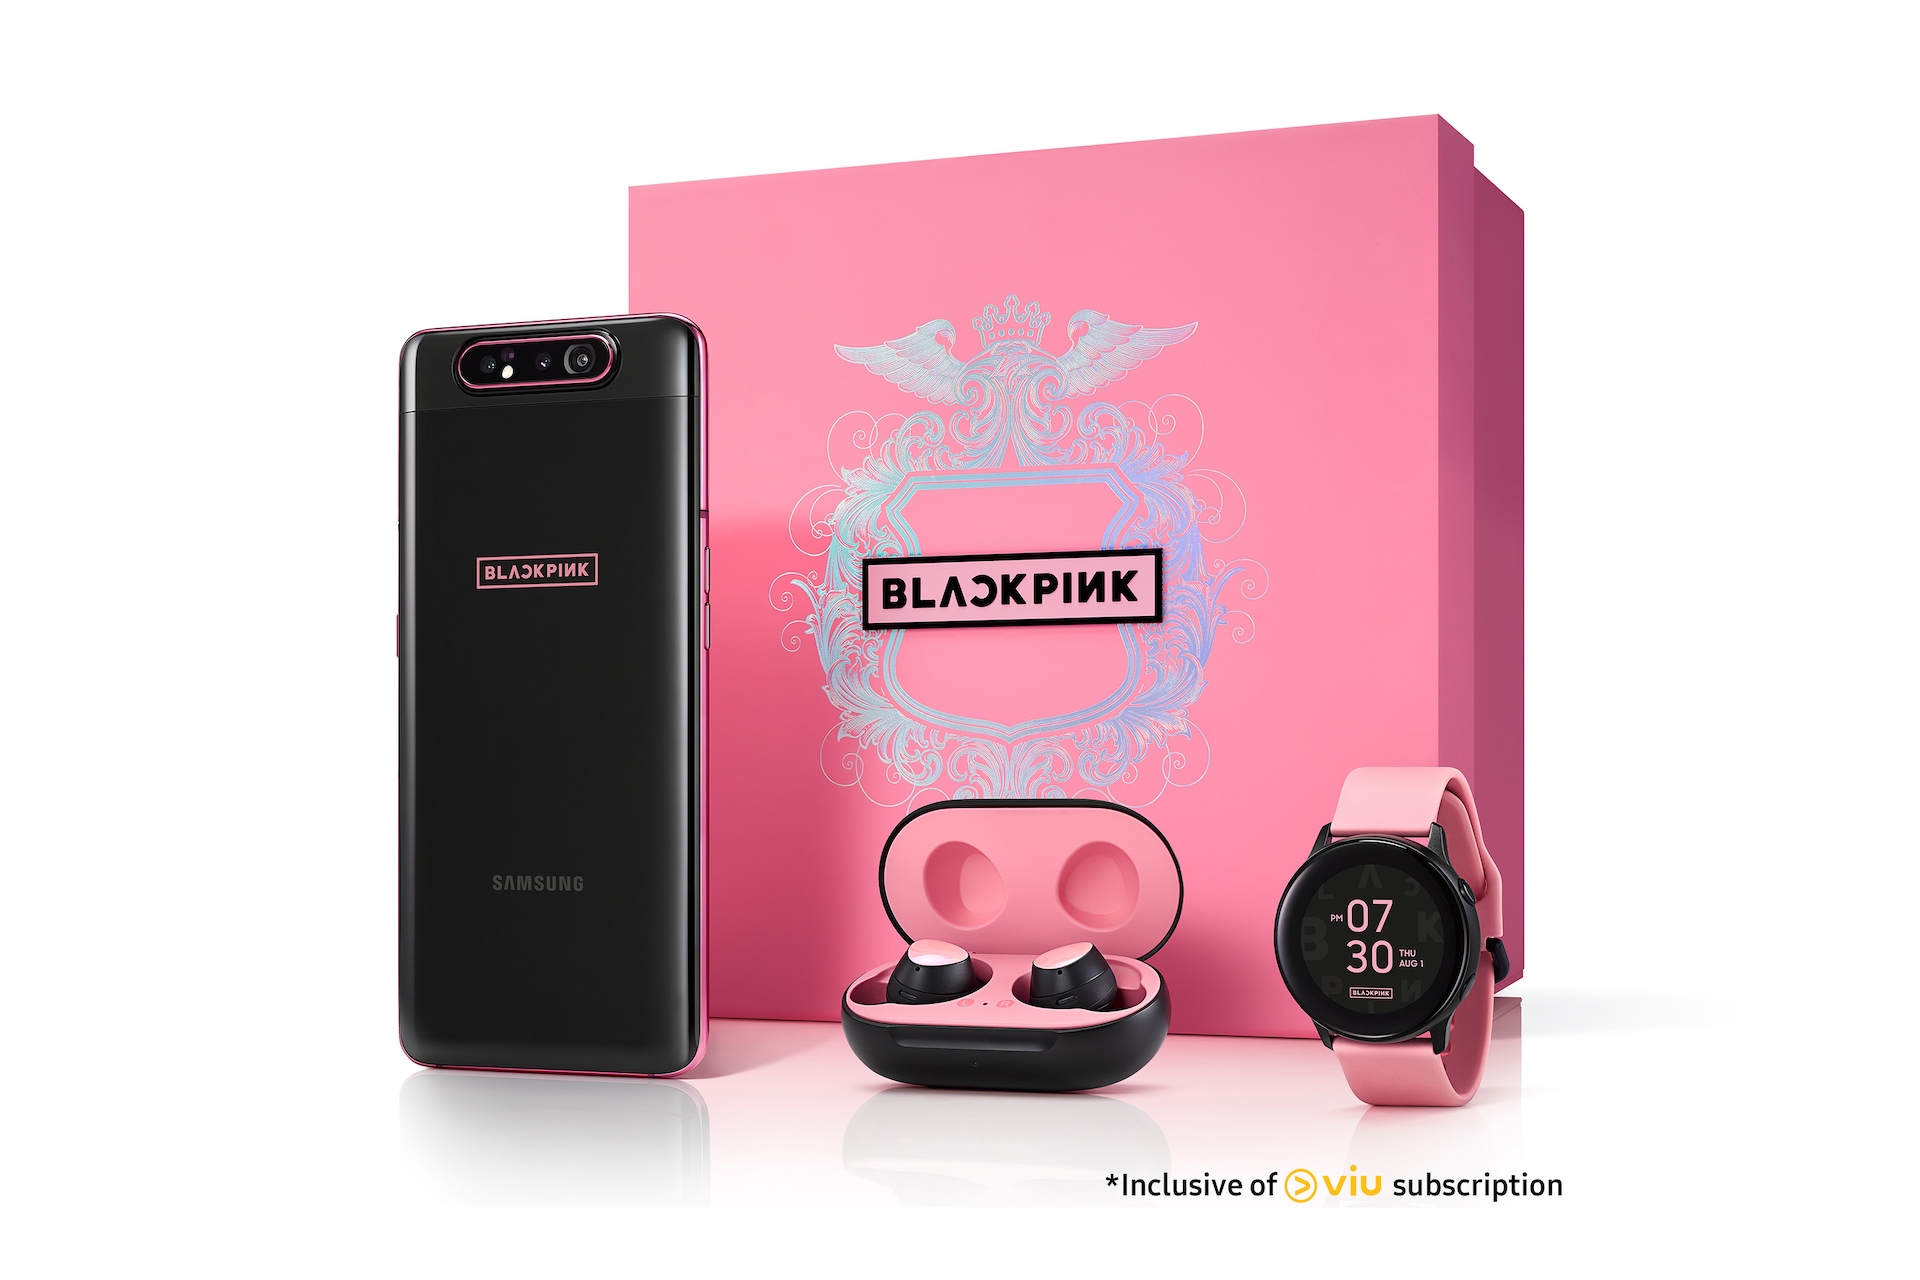 Samsung Galaxy A80 Blackpink Edition Price and availability in the